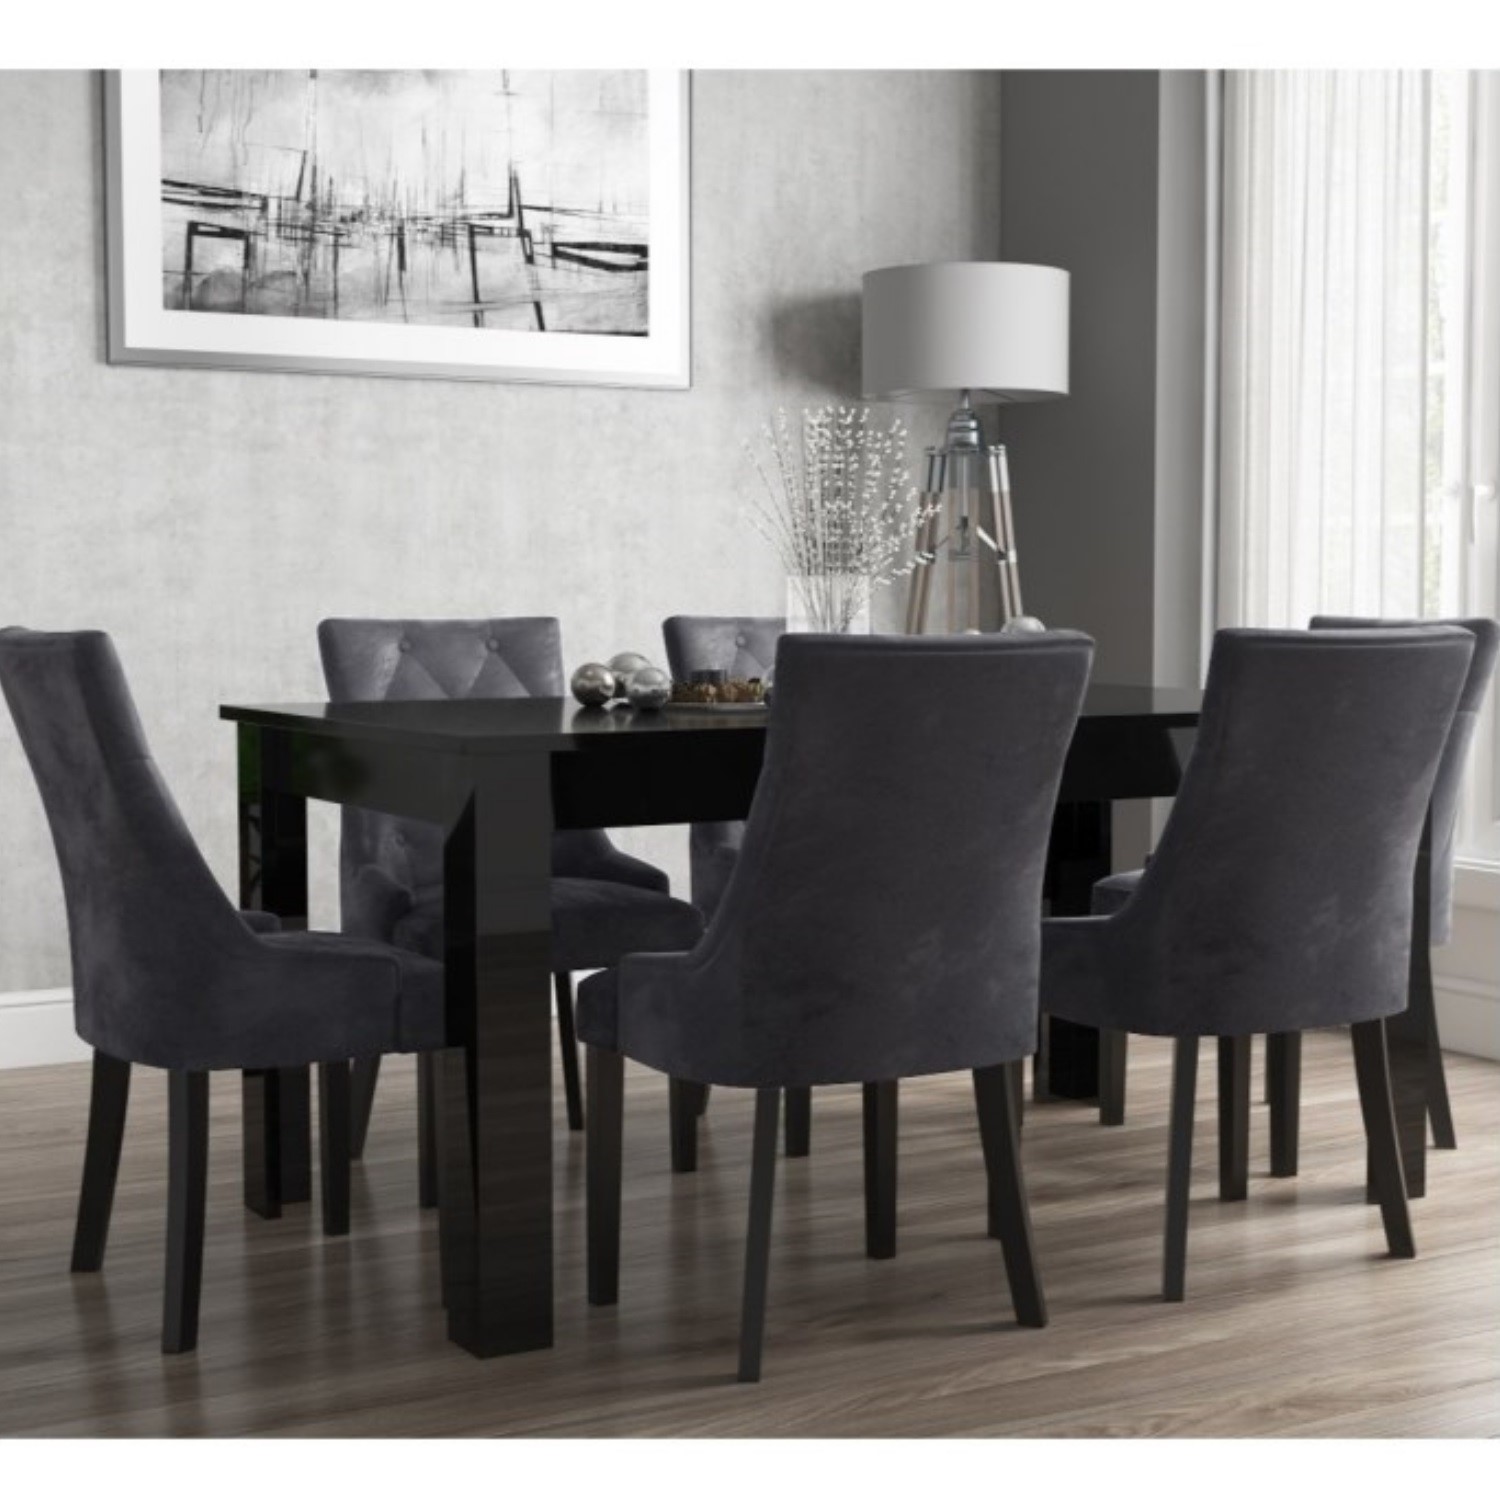 Extendable Dining Table In Black High, Black High Dining Table And Chairs